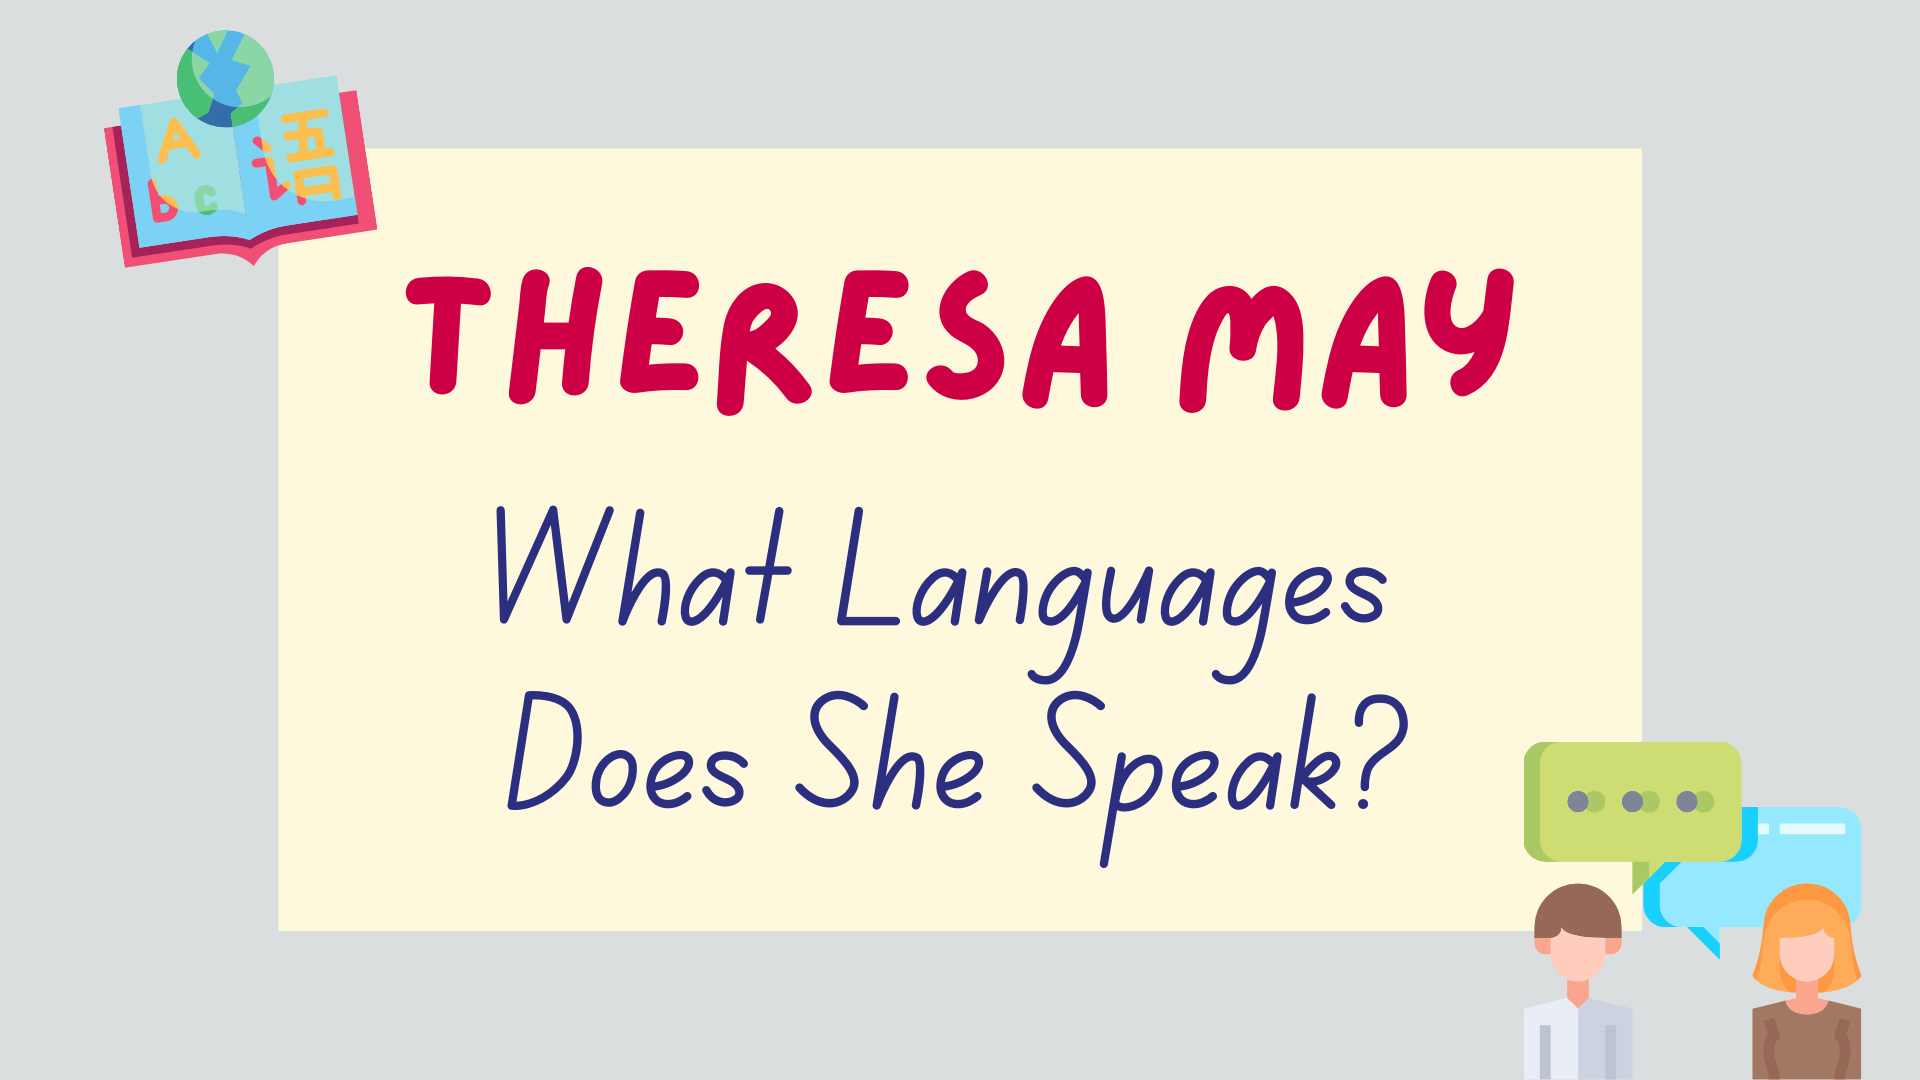 what languages does Theresa May speak - featured image